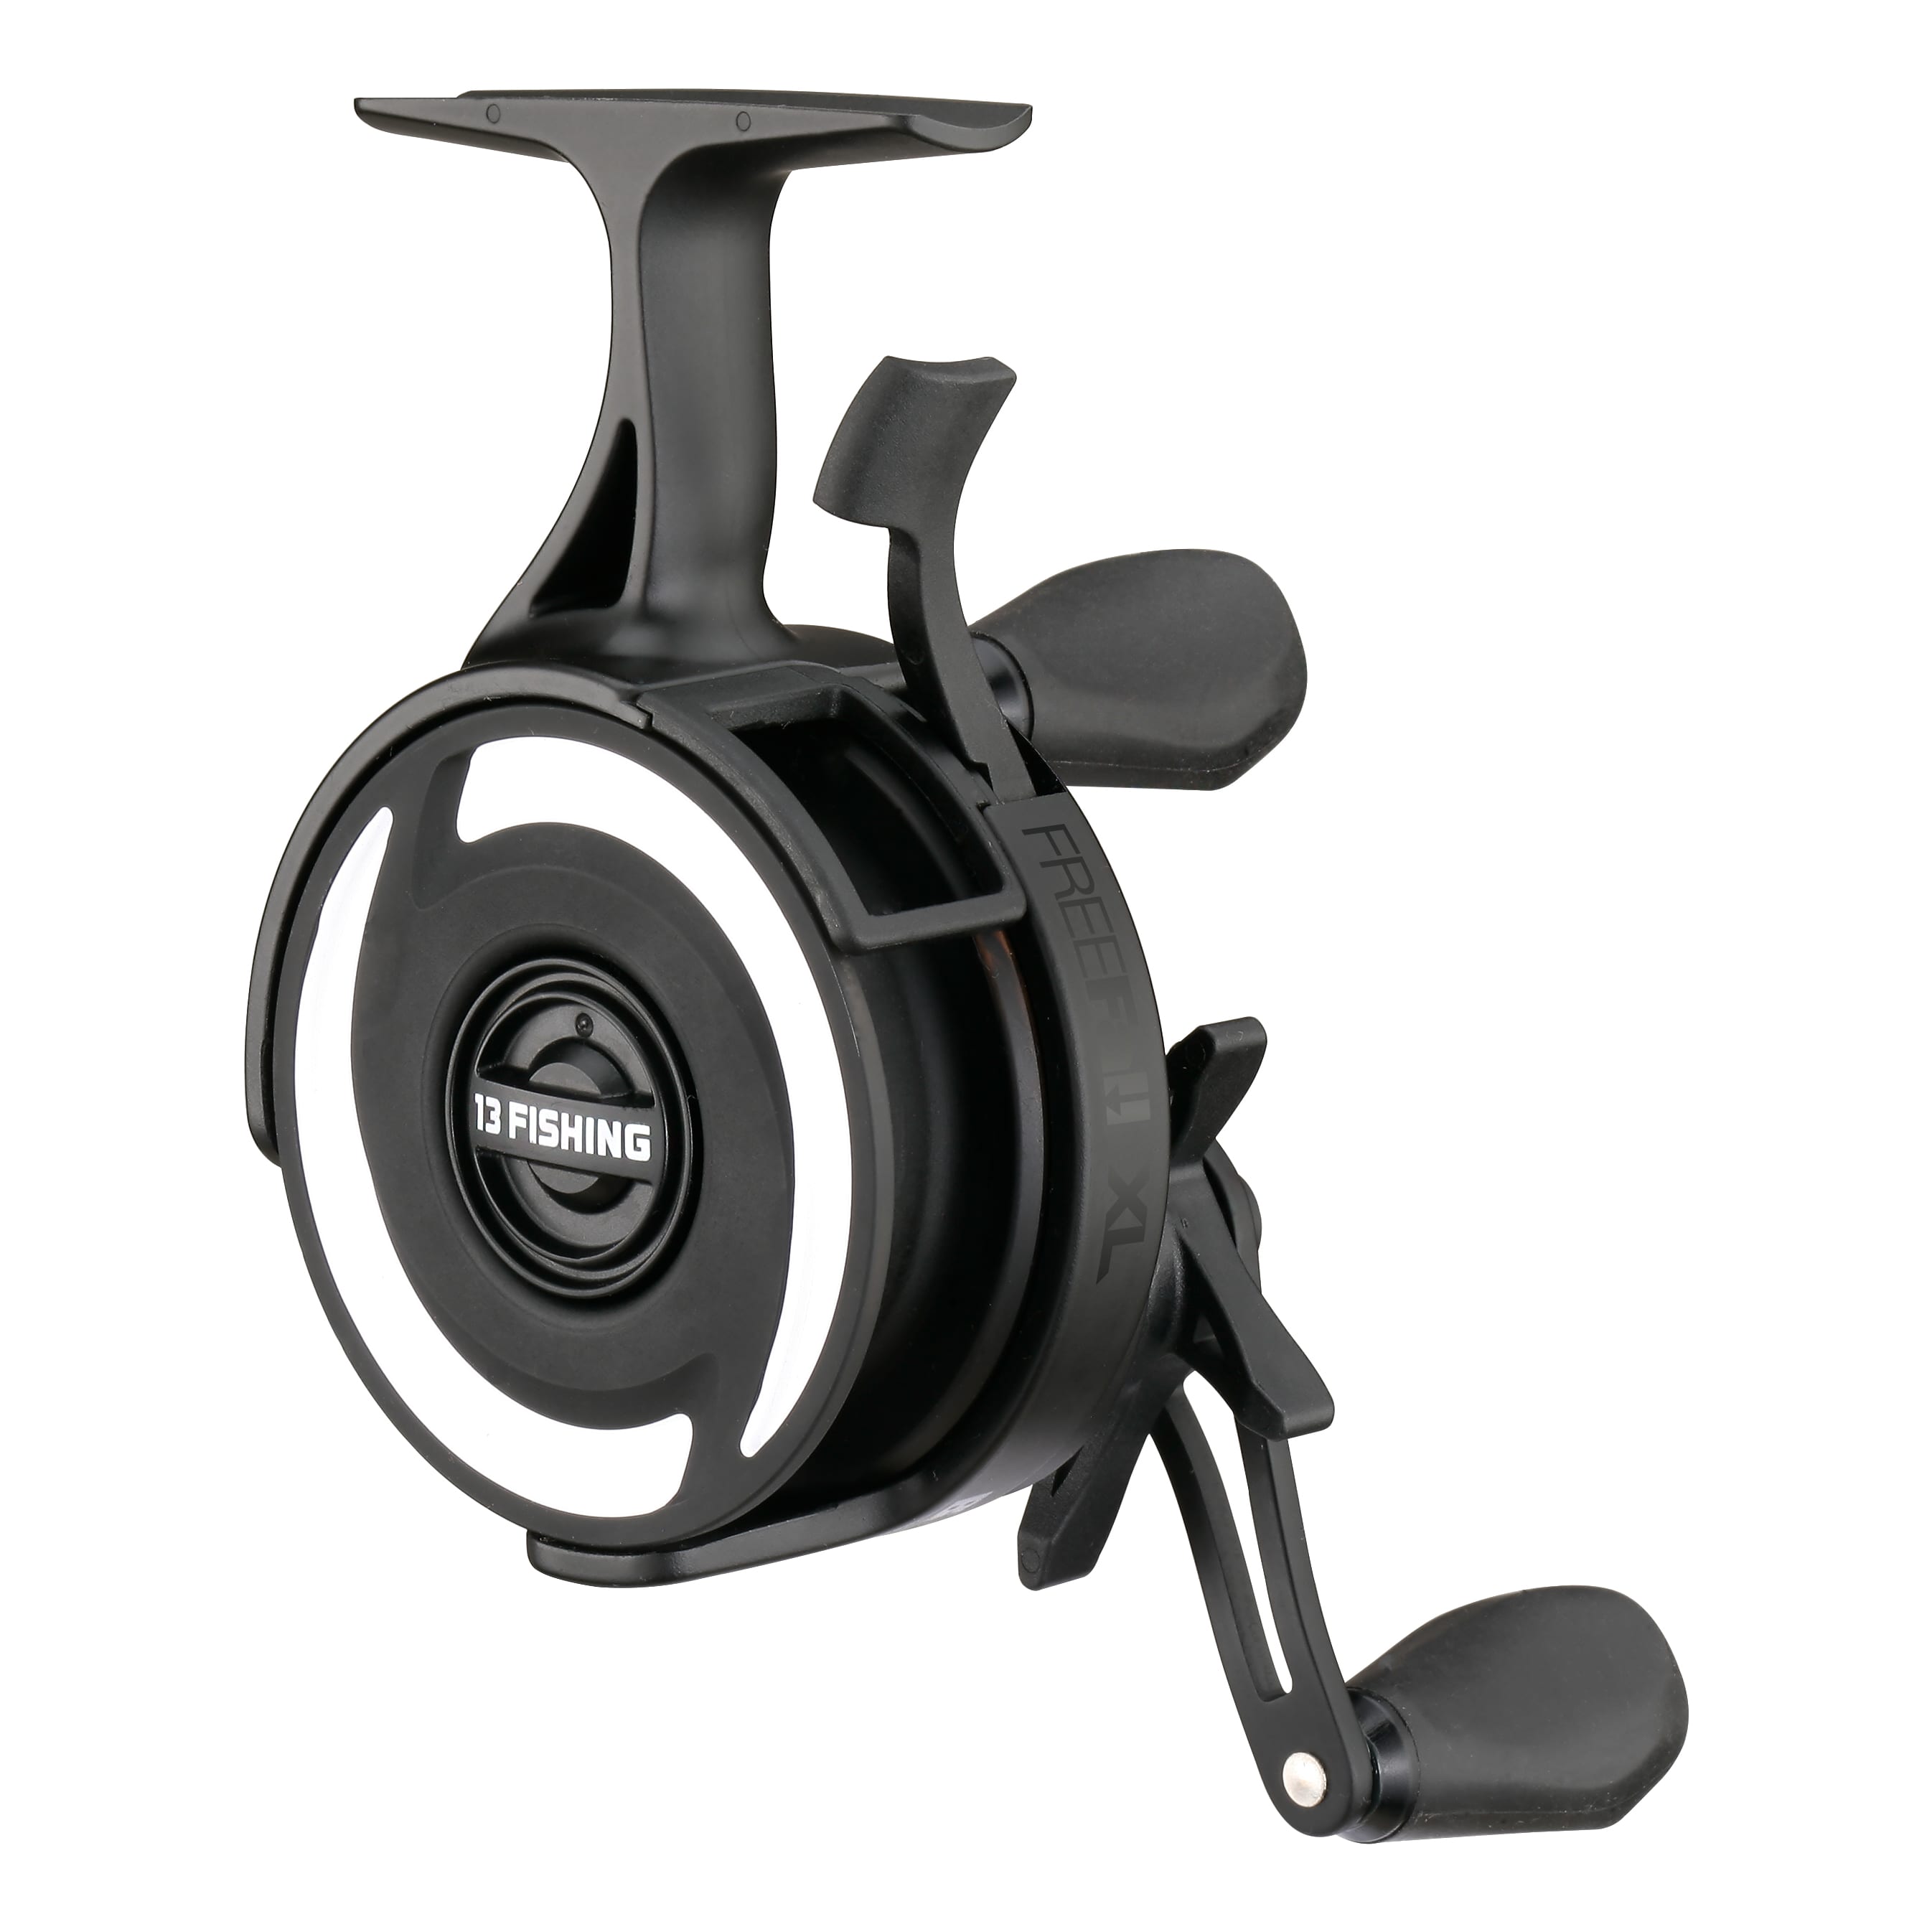 PFLUEGER President Inline Ice Reel – Canadian Tackle Store